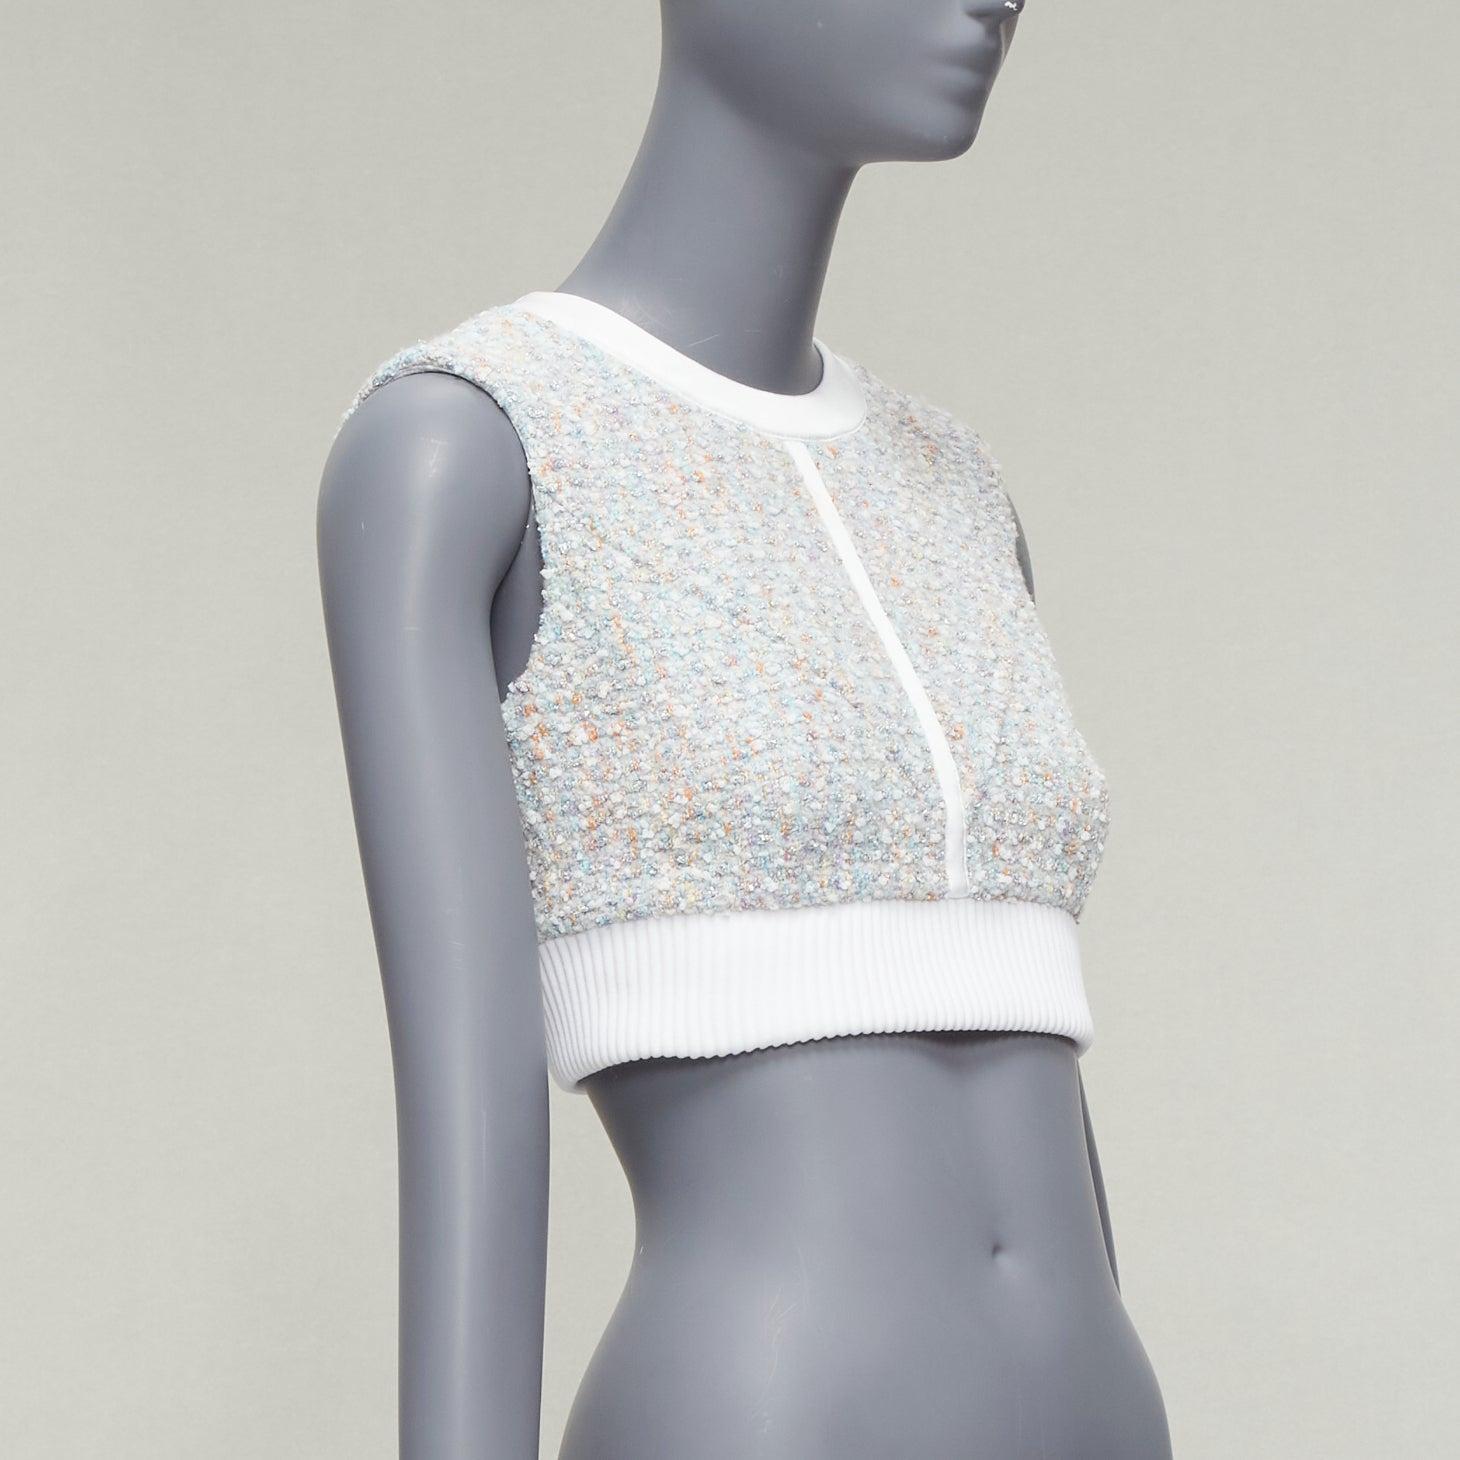 LOUIS VUITTON 2023 Runway pastel white boucle tweed crew crop top FR34 XS
Reference: AAWC/A00608
Brand: Louis Vuitton
Designer: Nicolas Ghesquiere
Collection: SS 2023 - Runway
Material: Polyamide, Blend
Color: White, Multicolour
Pattern: